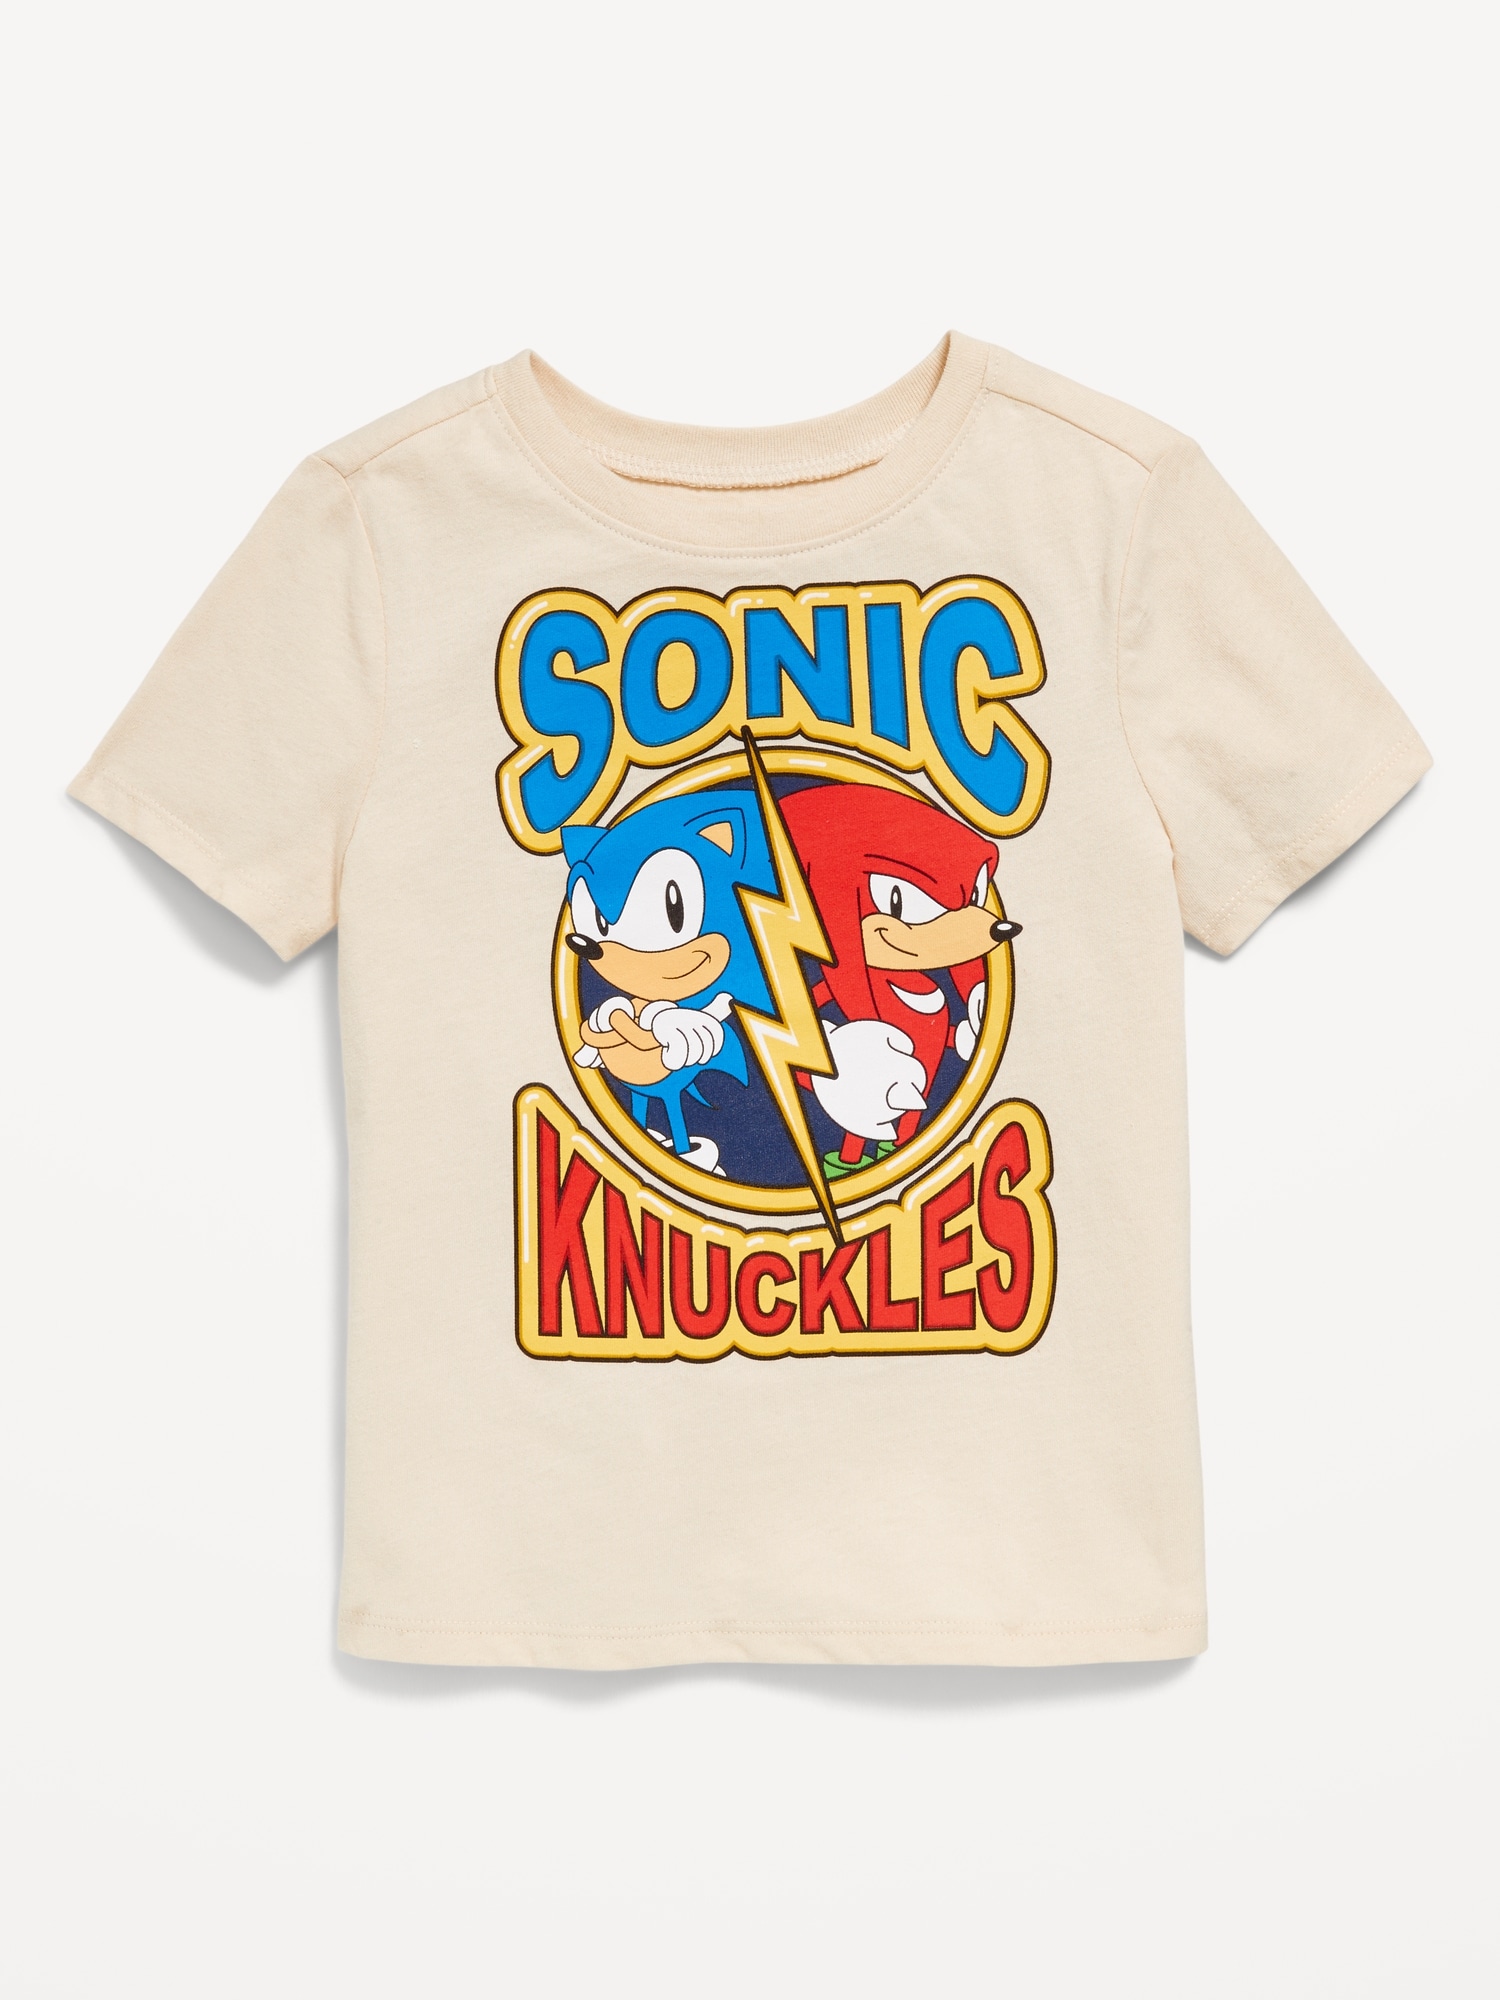 Sonic The Hedgehog Unisex Graphic T-Shirt for Toddler Hot Deal